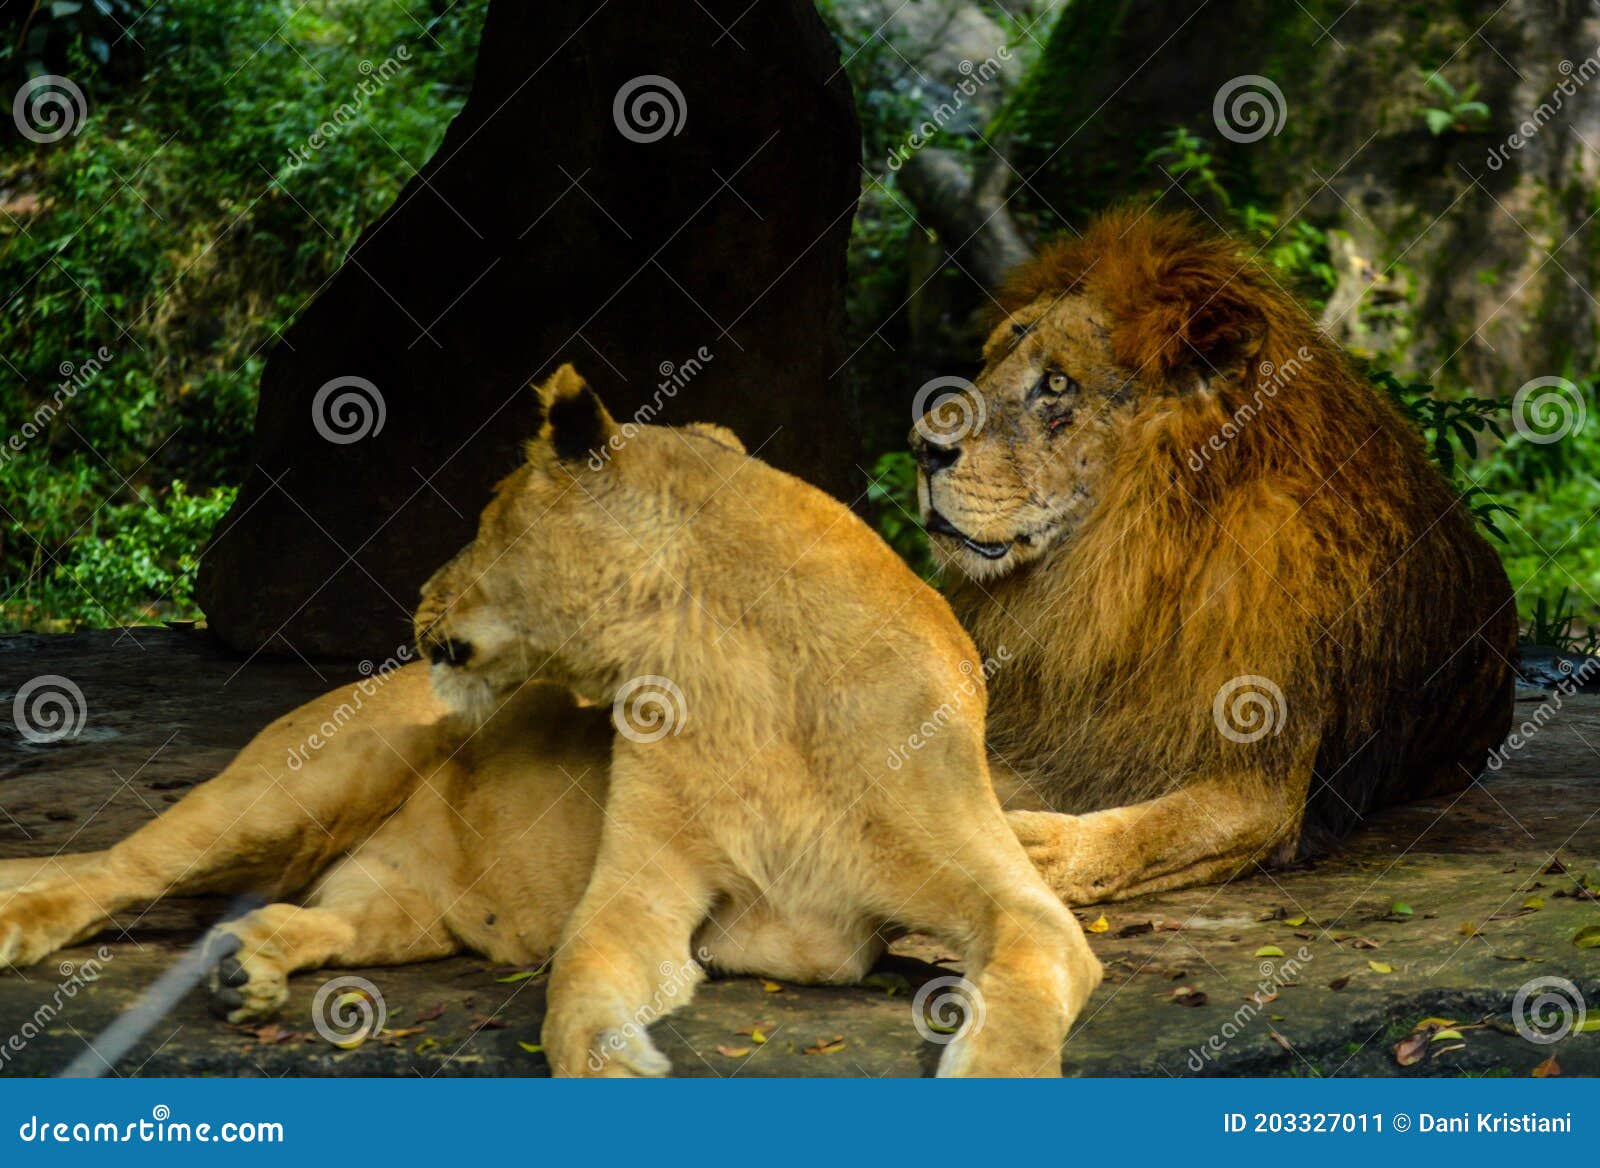 two lions looks sideway while sitting